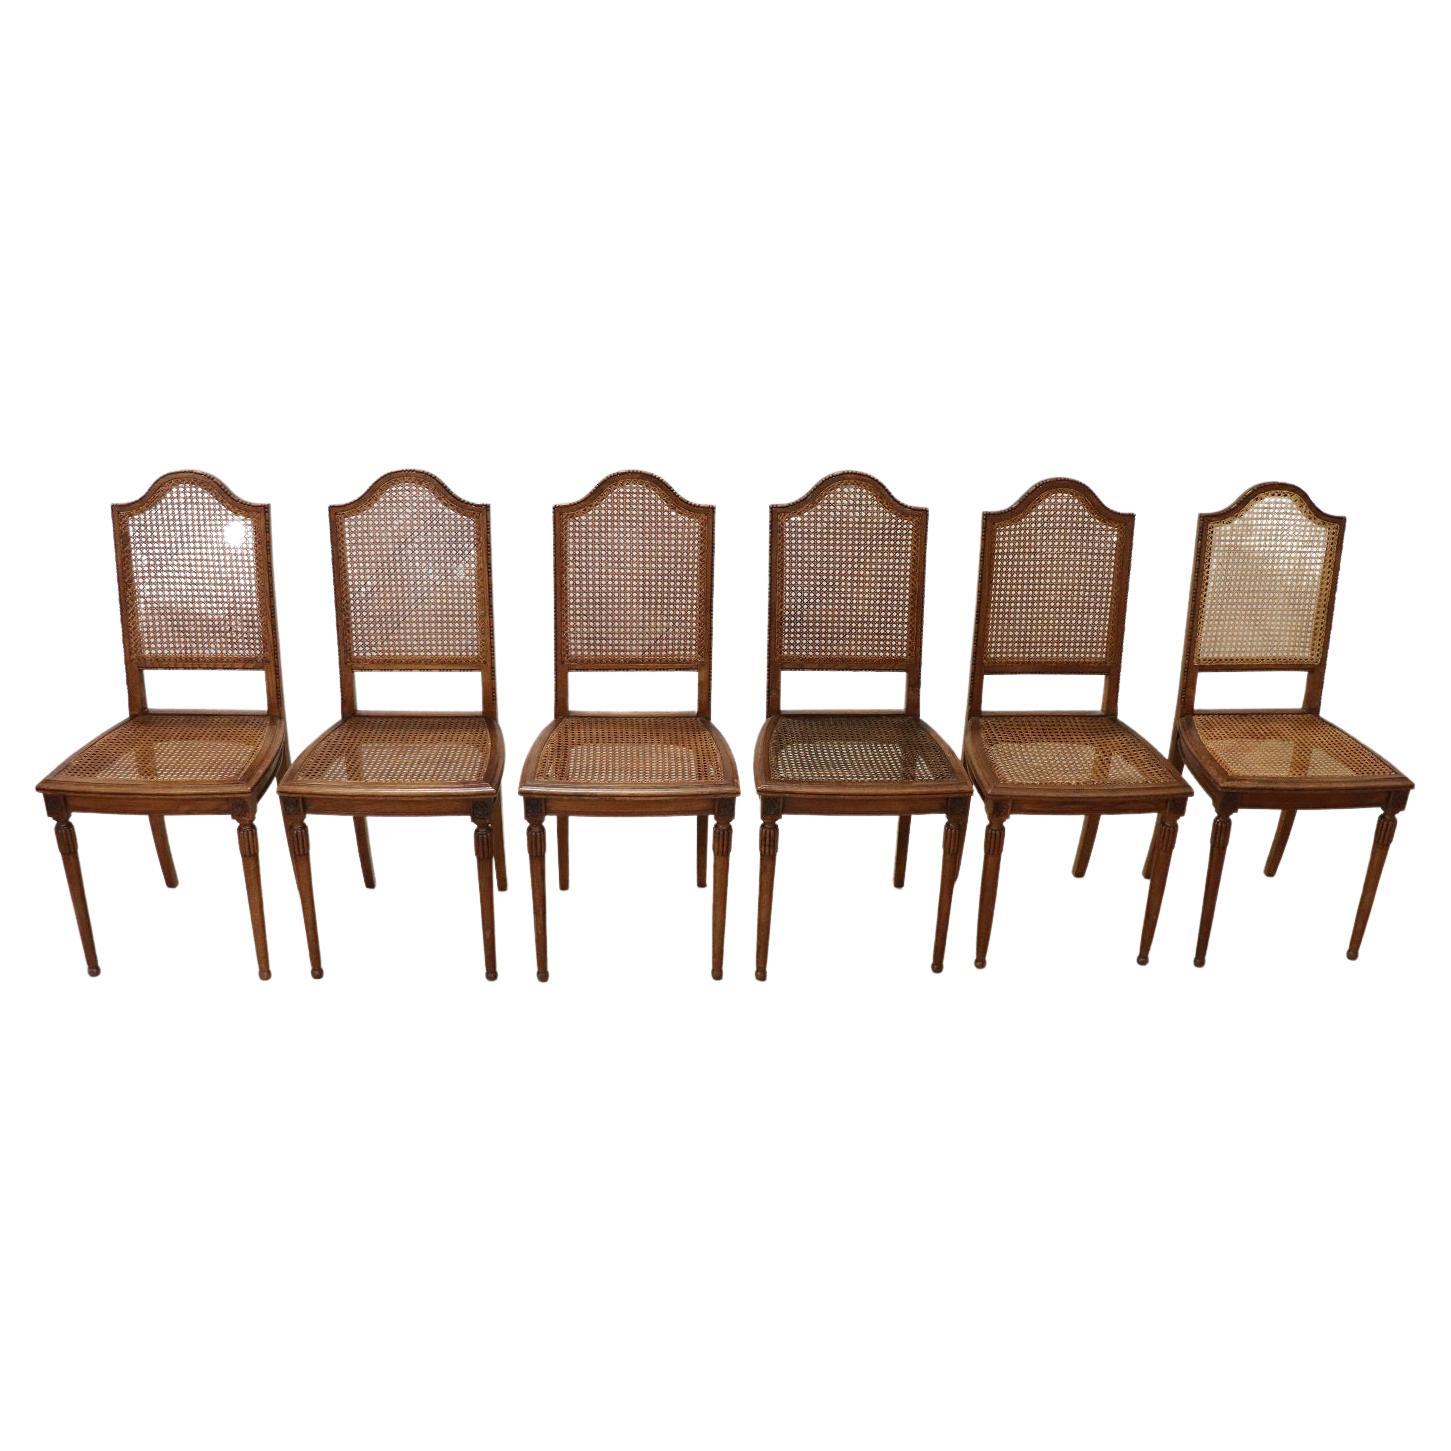 Louis XVI Style Oak Wood and Wien Straw Chairs, Set of 6